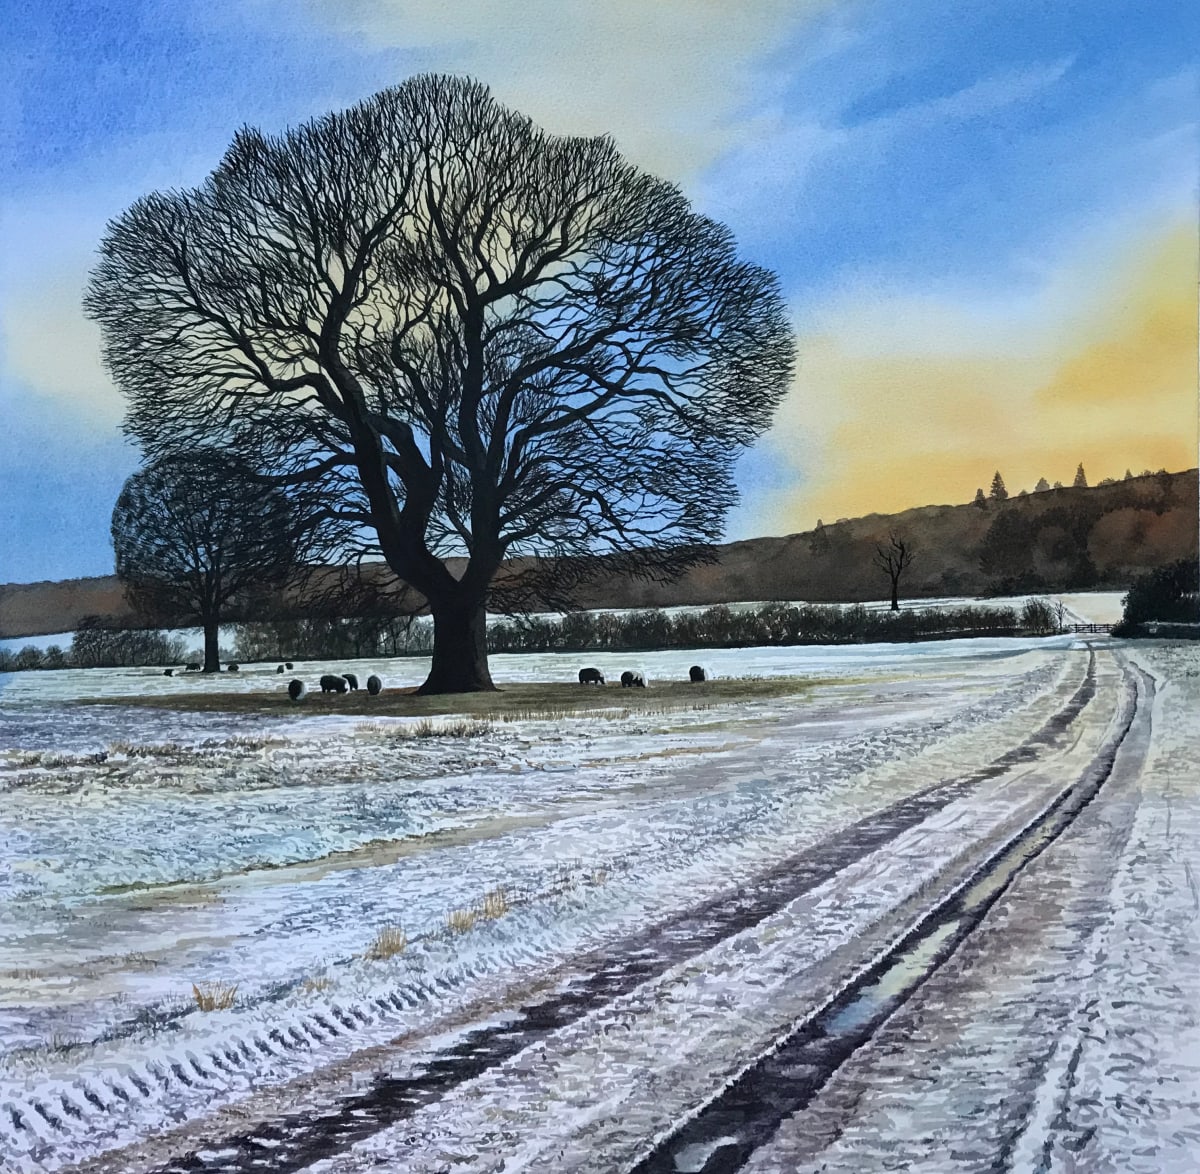 HOWARDIAN_TREE_II by Dave P. Cooper  Image: Sheep grazing under a tree on a winters day in the Castle Howard estate